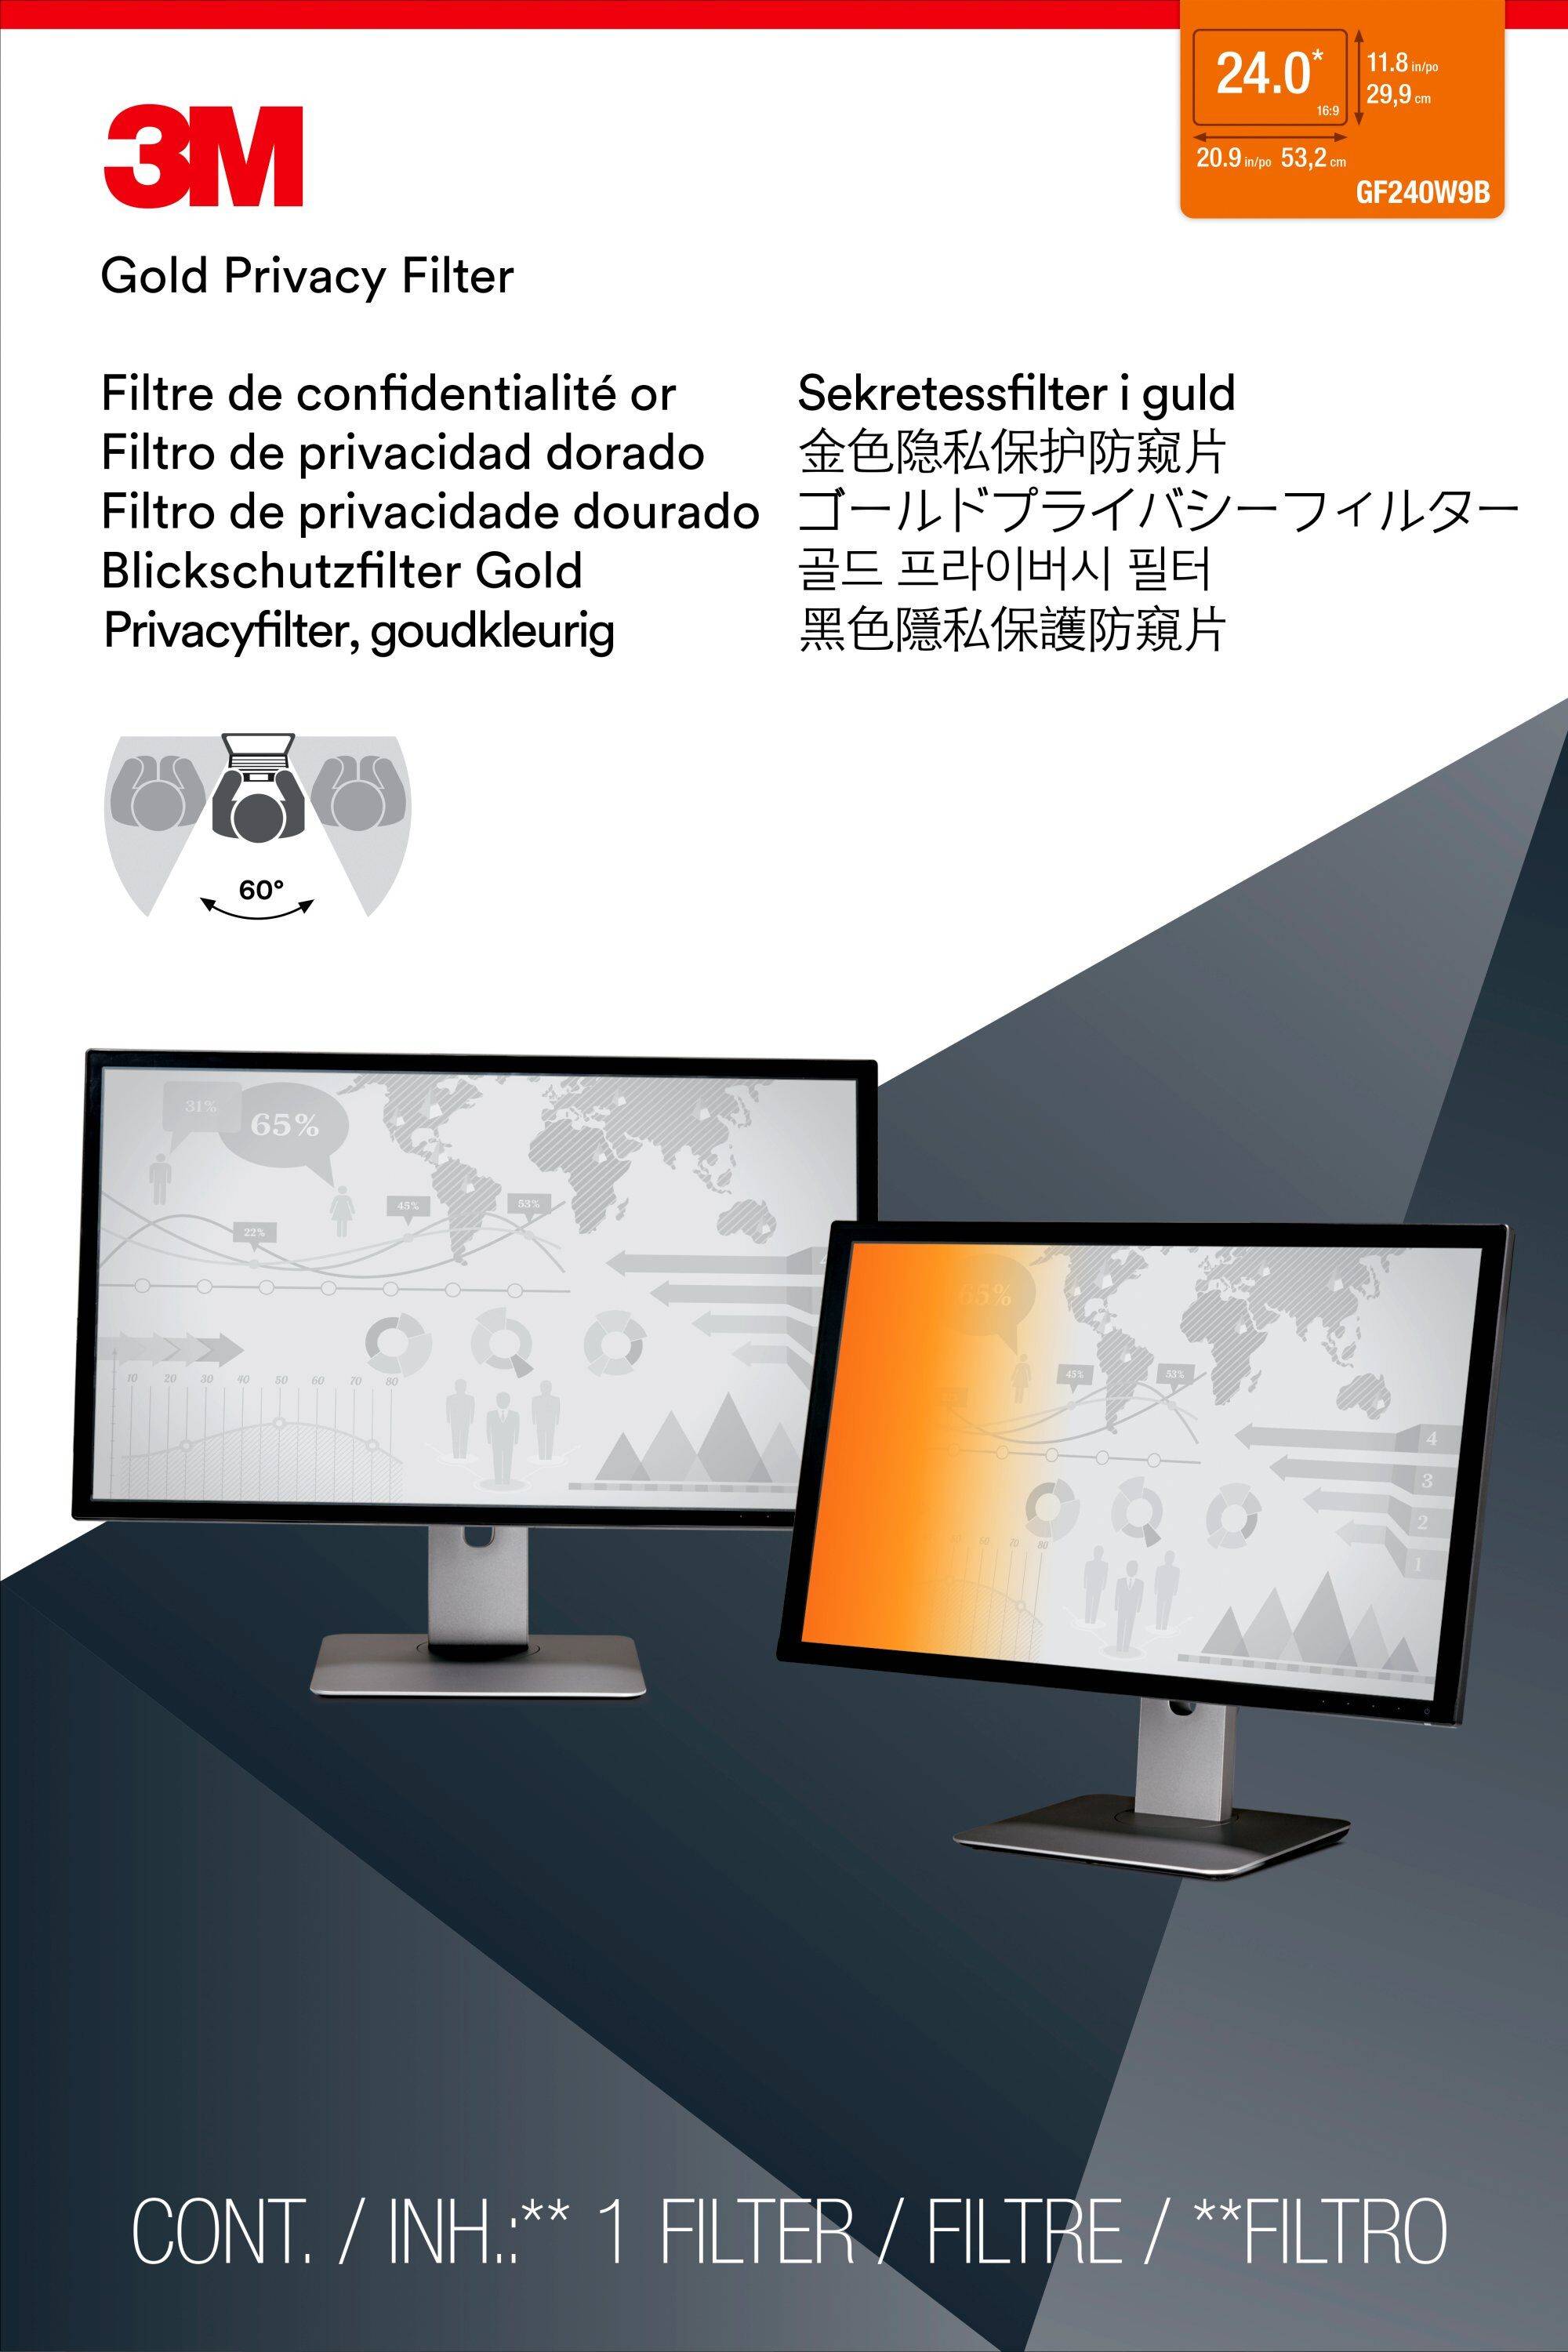 Rca Informatique - image du produit : GOLD PRIVACY FILTER FOR 24IN WIDESCREEN MONITOR